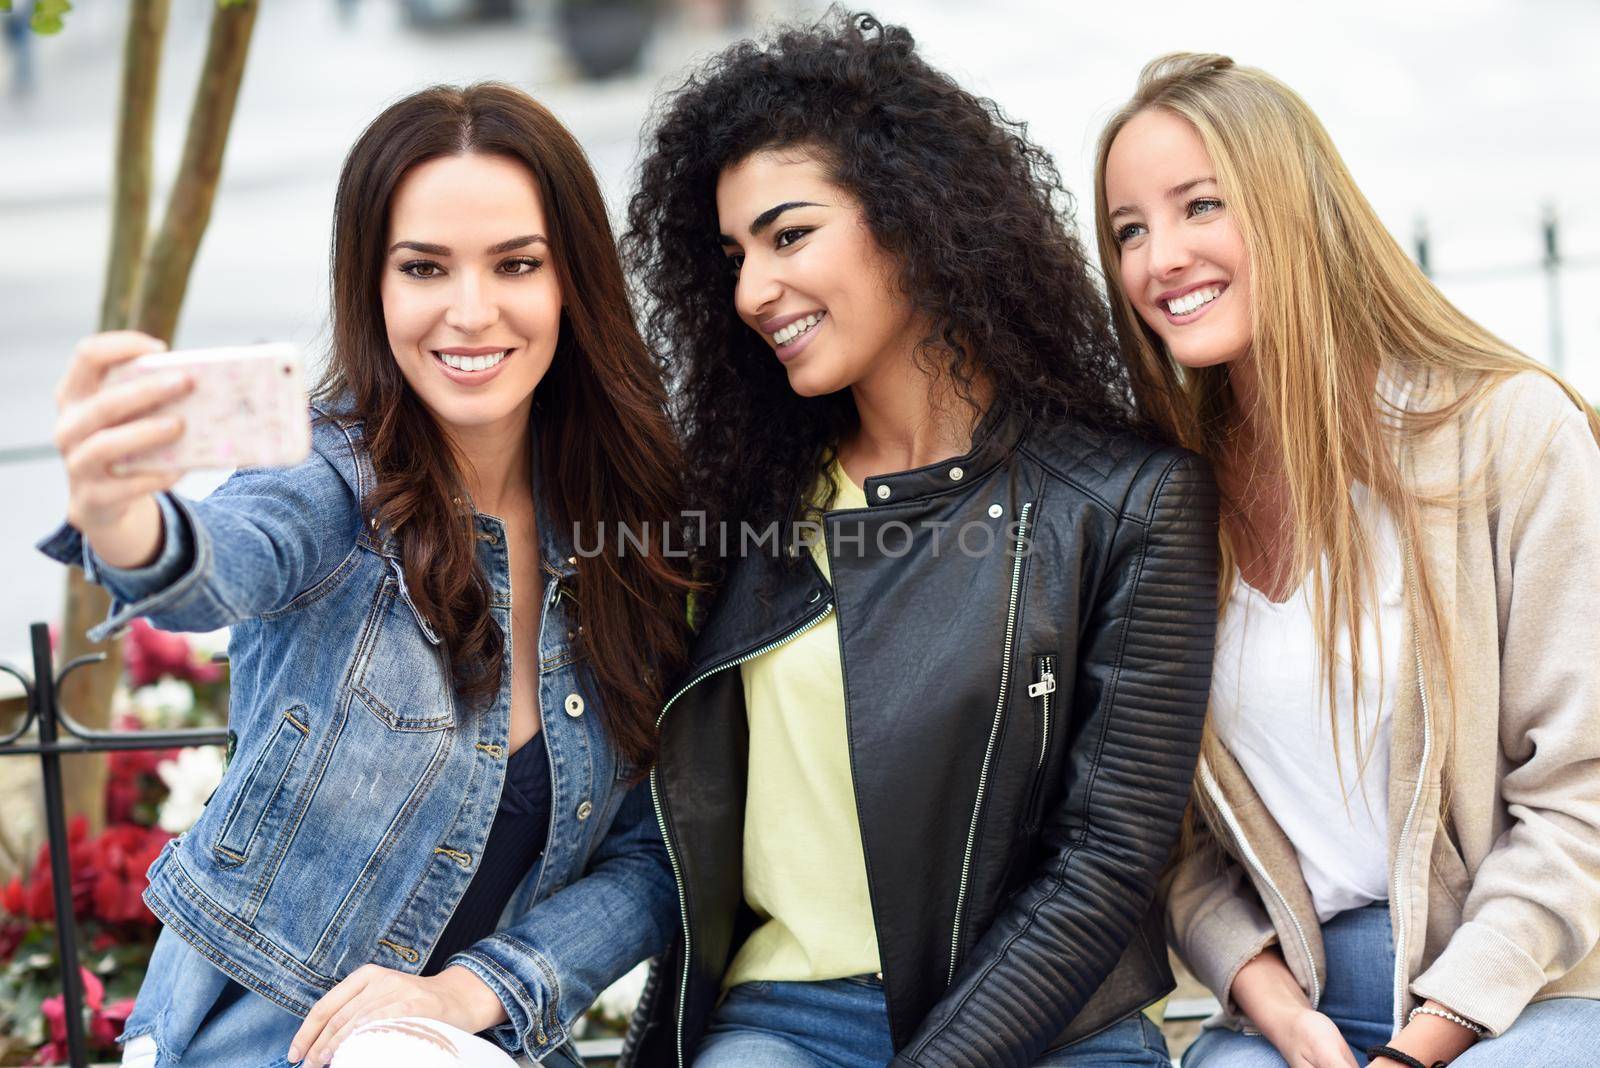 Group of multi-ethnic young women taking a selfie photograph together outdoors. Blonde, brunette and mixed females wearing casual clothes in urban background.